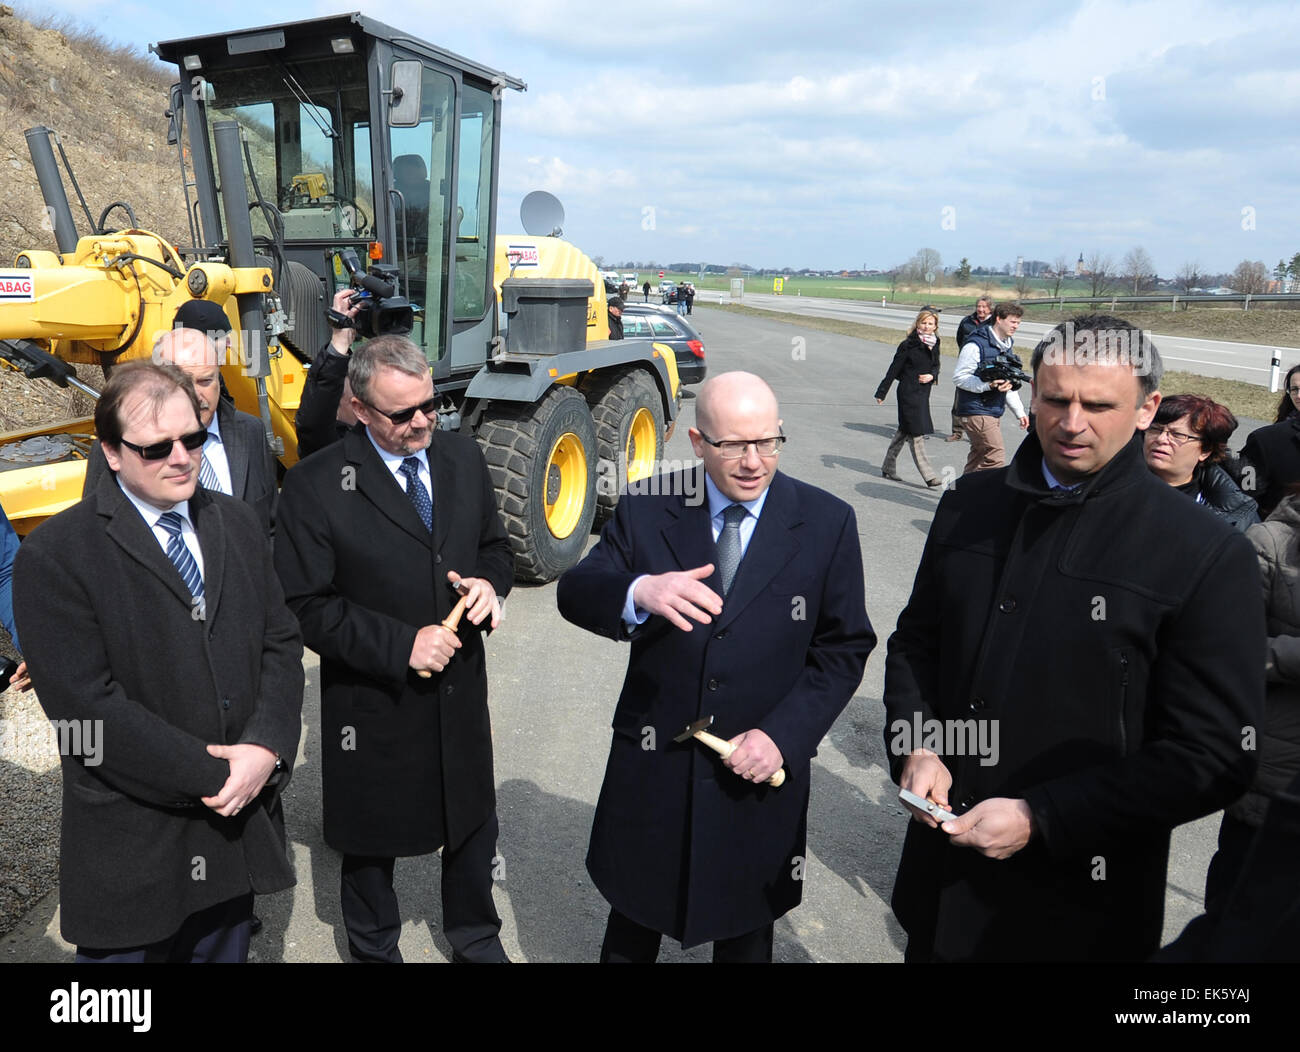 From left to right General Director of Road and Motorway Directorate of the Czech Republic Jaroslav Kroupa, Czech Minister of Transport Dan Tok, Prime Minister Bohuslav Sobotka and Mayor of South Bohemia region Jiri Zimola attend the symbolical ceremony of start the construction of further two sections of motorway D3 was held in Veseli nad Luznici, Czech Republic, April 7, 2015. Motorway will connect Prague with Ceske Budejovice in section Veseli nad Luznici to Bosilec and in Borek to Usilne. (CTK Photo/Vaclav Pancer) Stock Photo